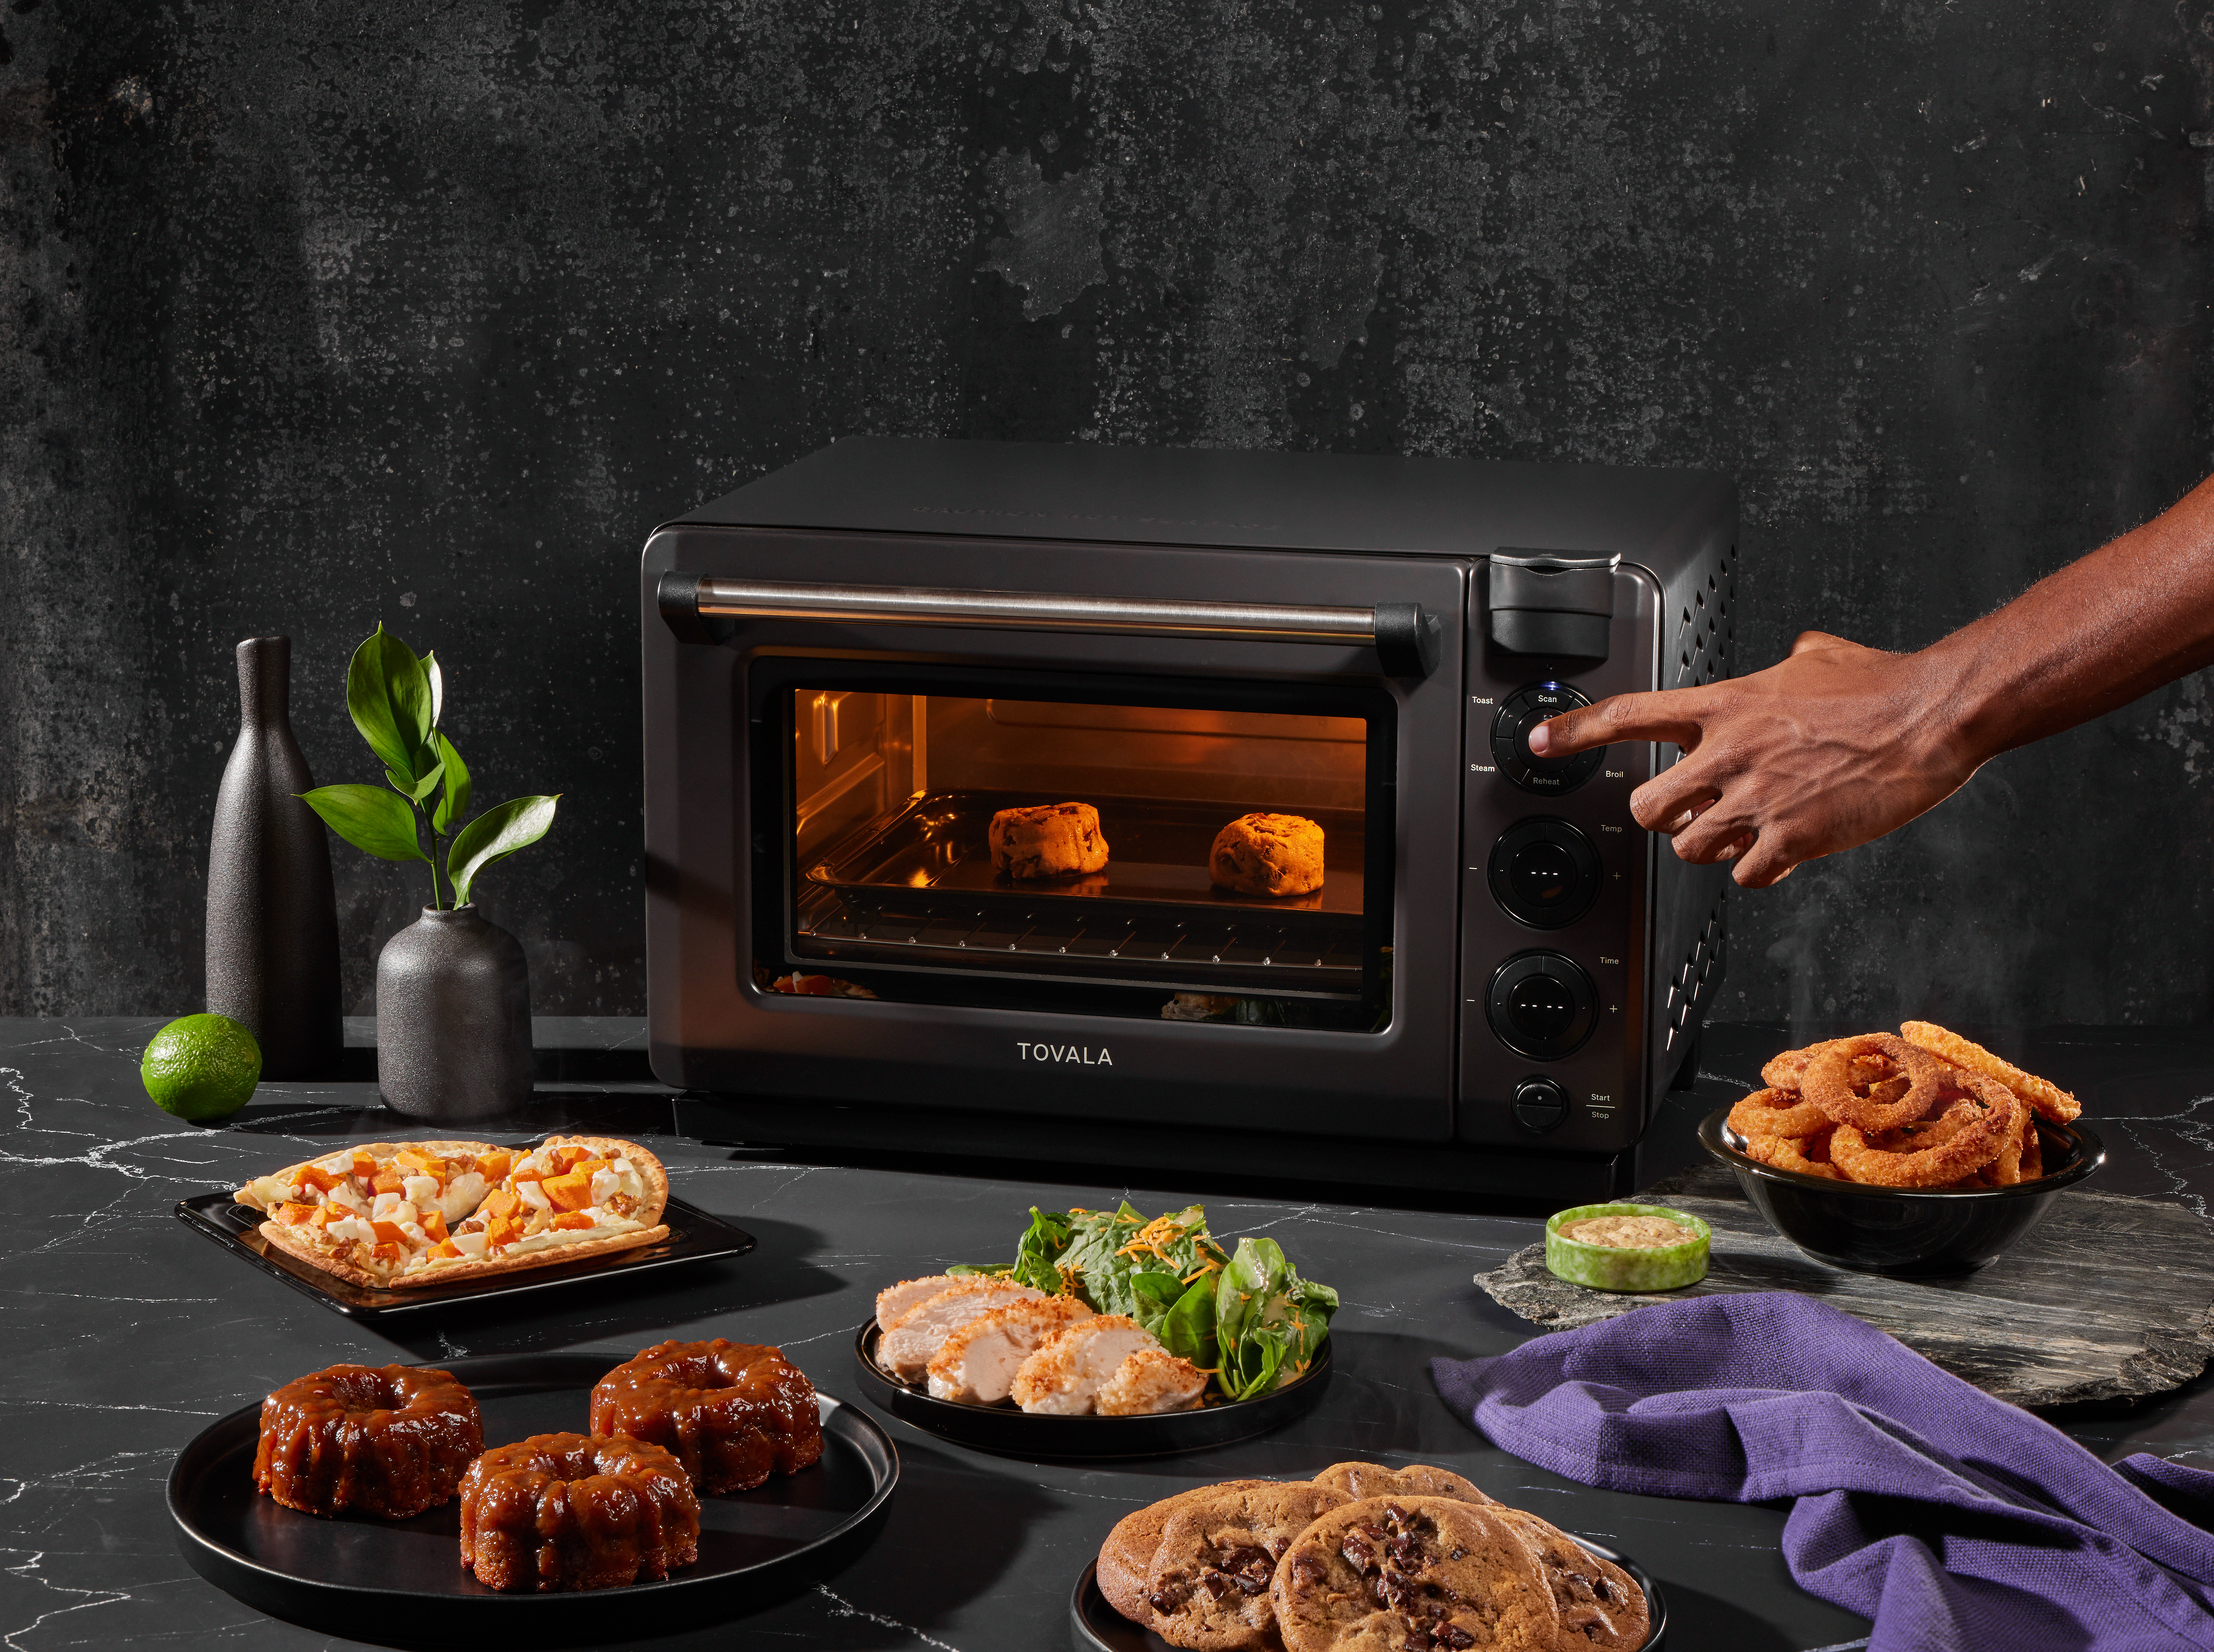 Ready to Cook Smarter? Don’t Miss Tovala’s Best Deal Ever This Memorial Day